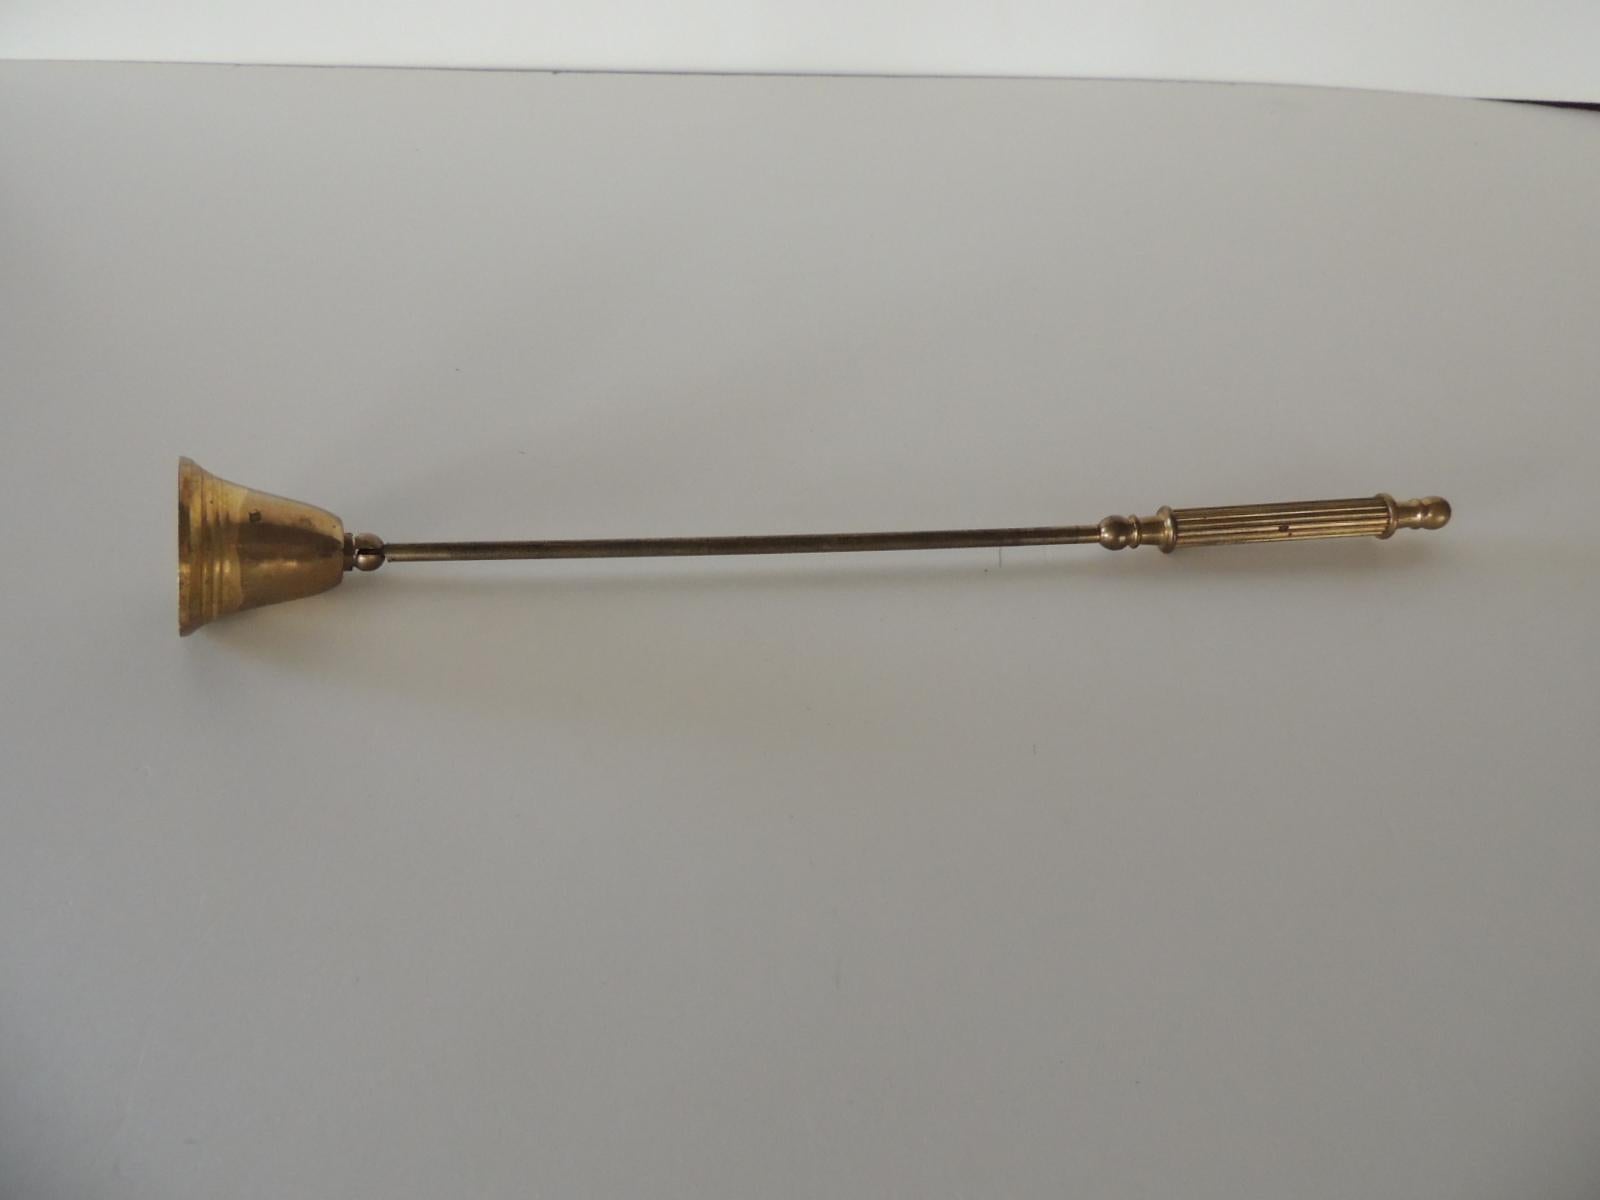 Brass articulated arm candle snuffer
Size: 11.5